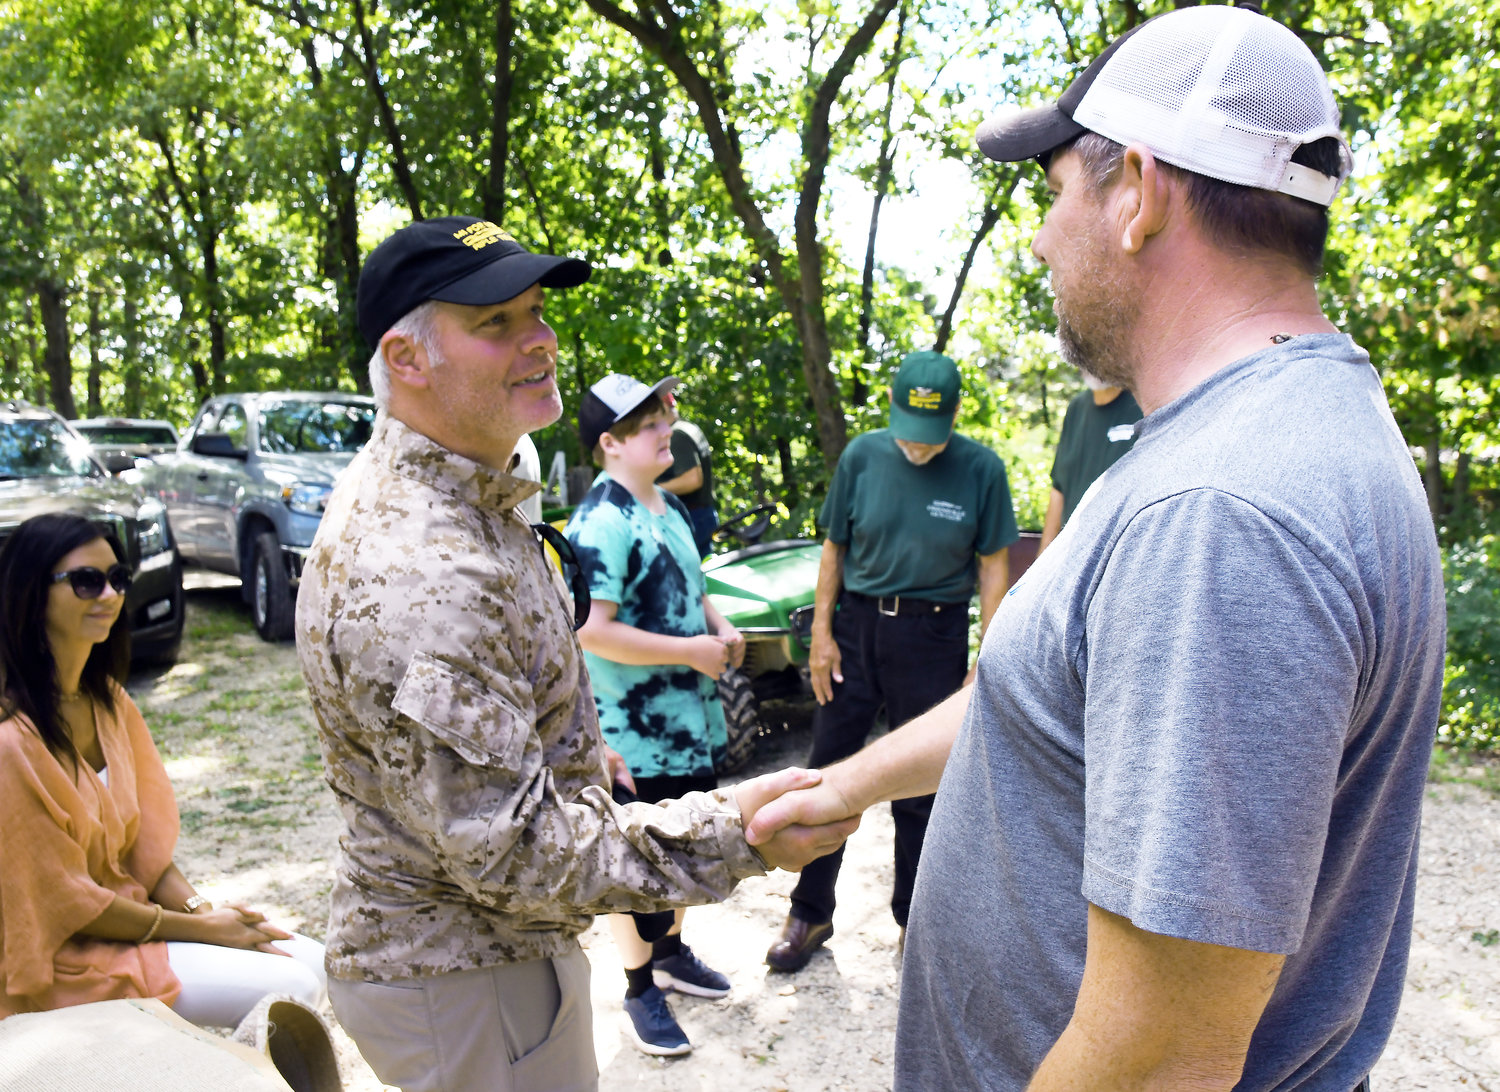 Rifle Team member Paul Schmitz (right) shakes hands with Gassoff following the CMP shooting match each participated in that day. Schmitz was a prior recipient of an M1 Garand from the project for wounds he received in Iraq.